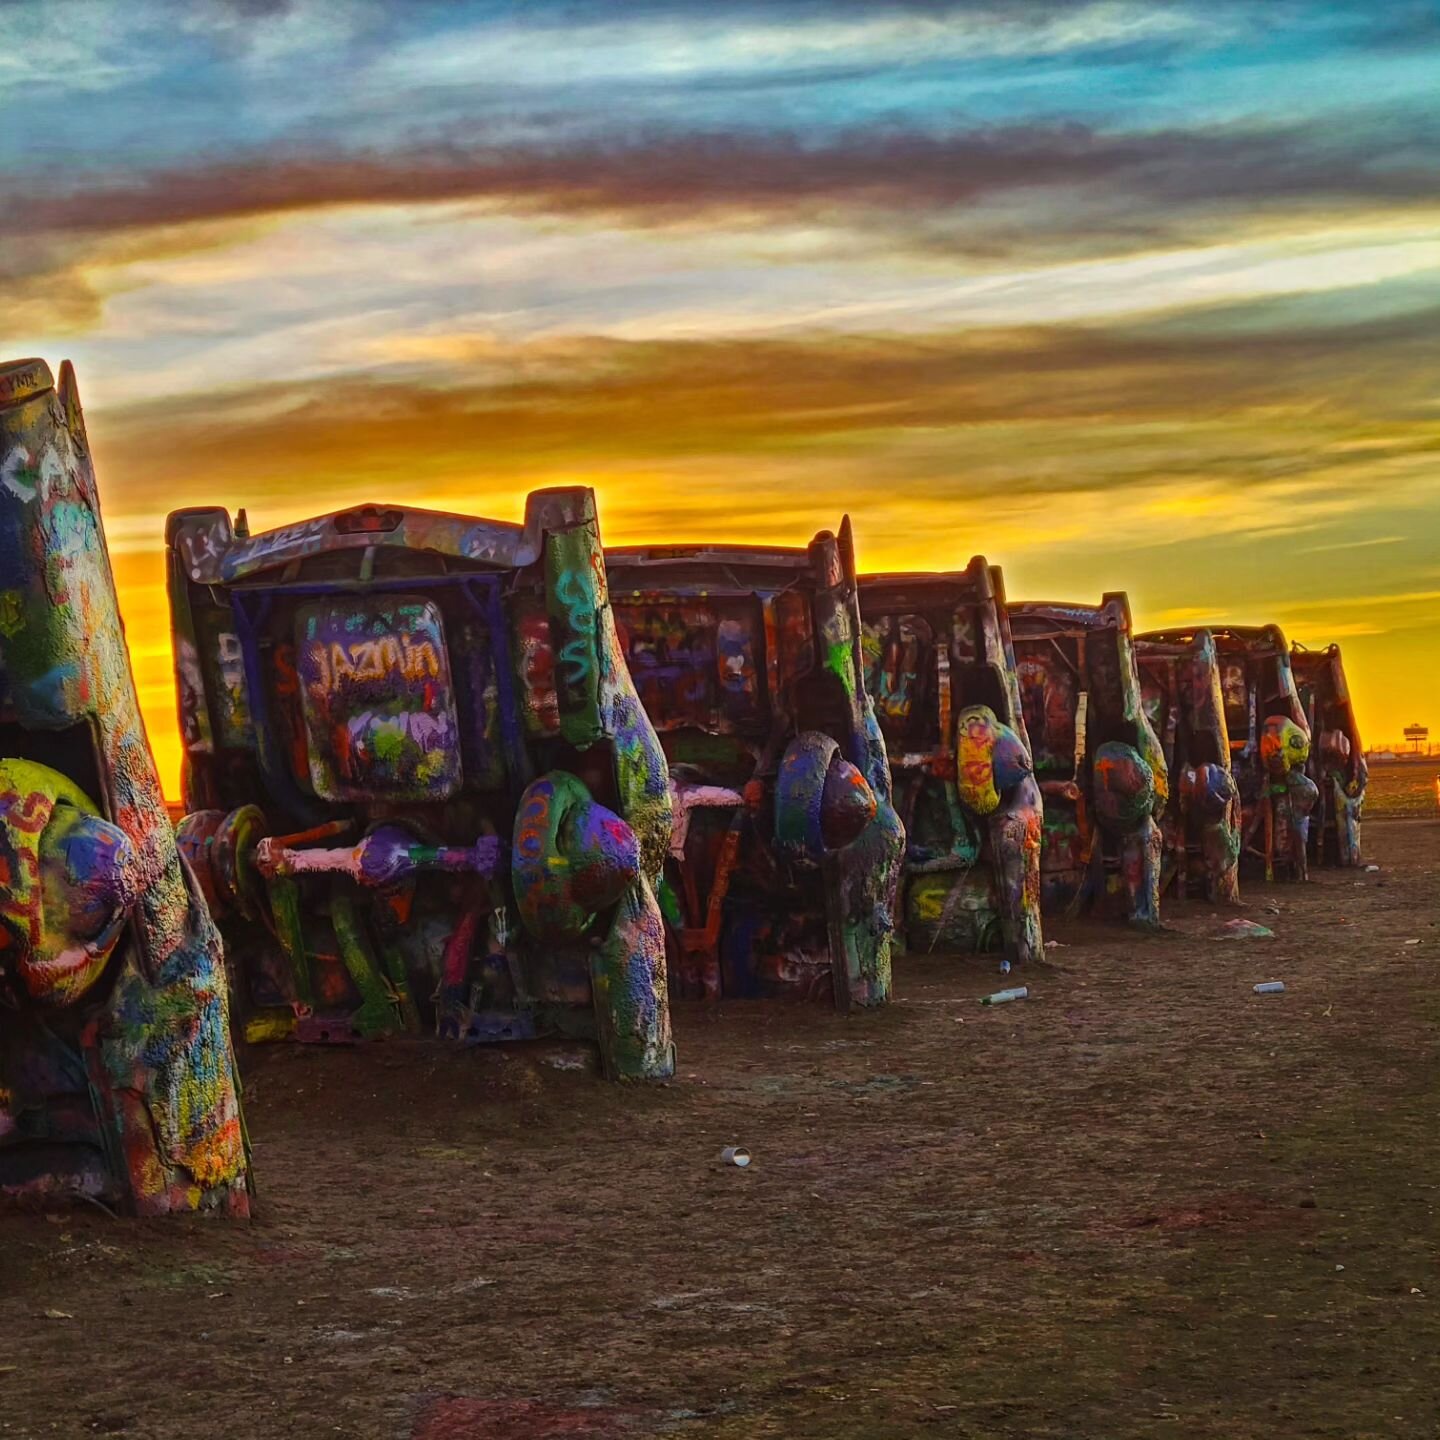 🍀I guess third time's the charm
.
📸 At my third visit to @officialcadillacranch since 2016 I finally made a decent photo
.
🛣️ From my recent travel of a portion of Route 66
.
.
.
.
.
.
.
.
#travelphotography 
#vanlife 
#cadillacranch 
#texastodo
#